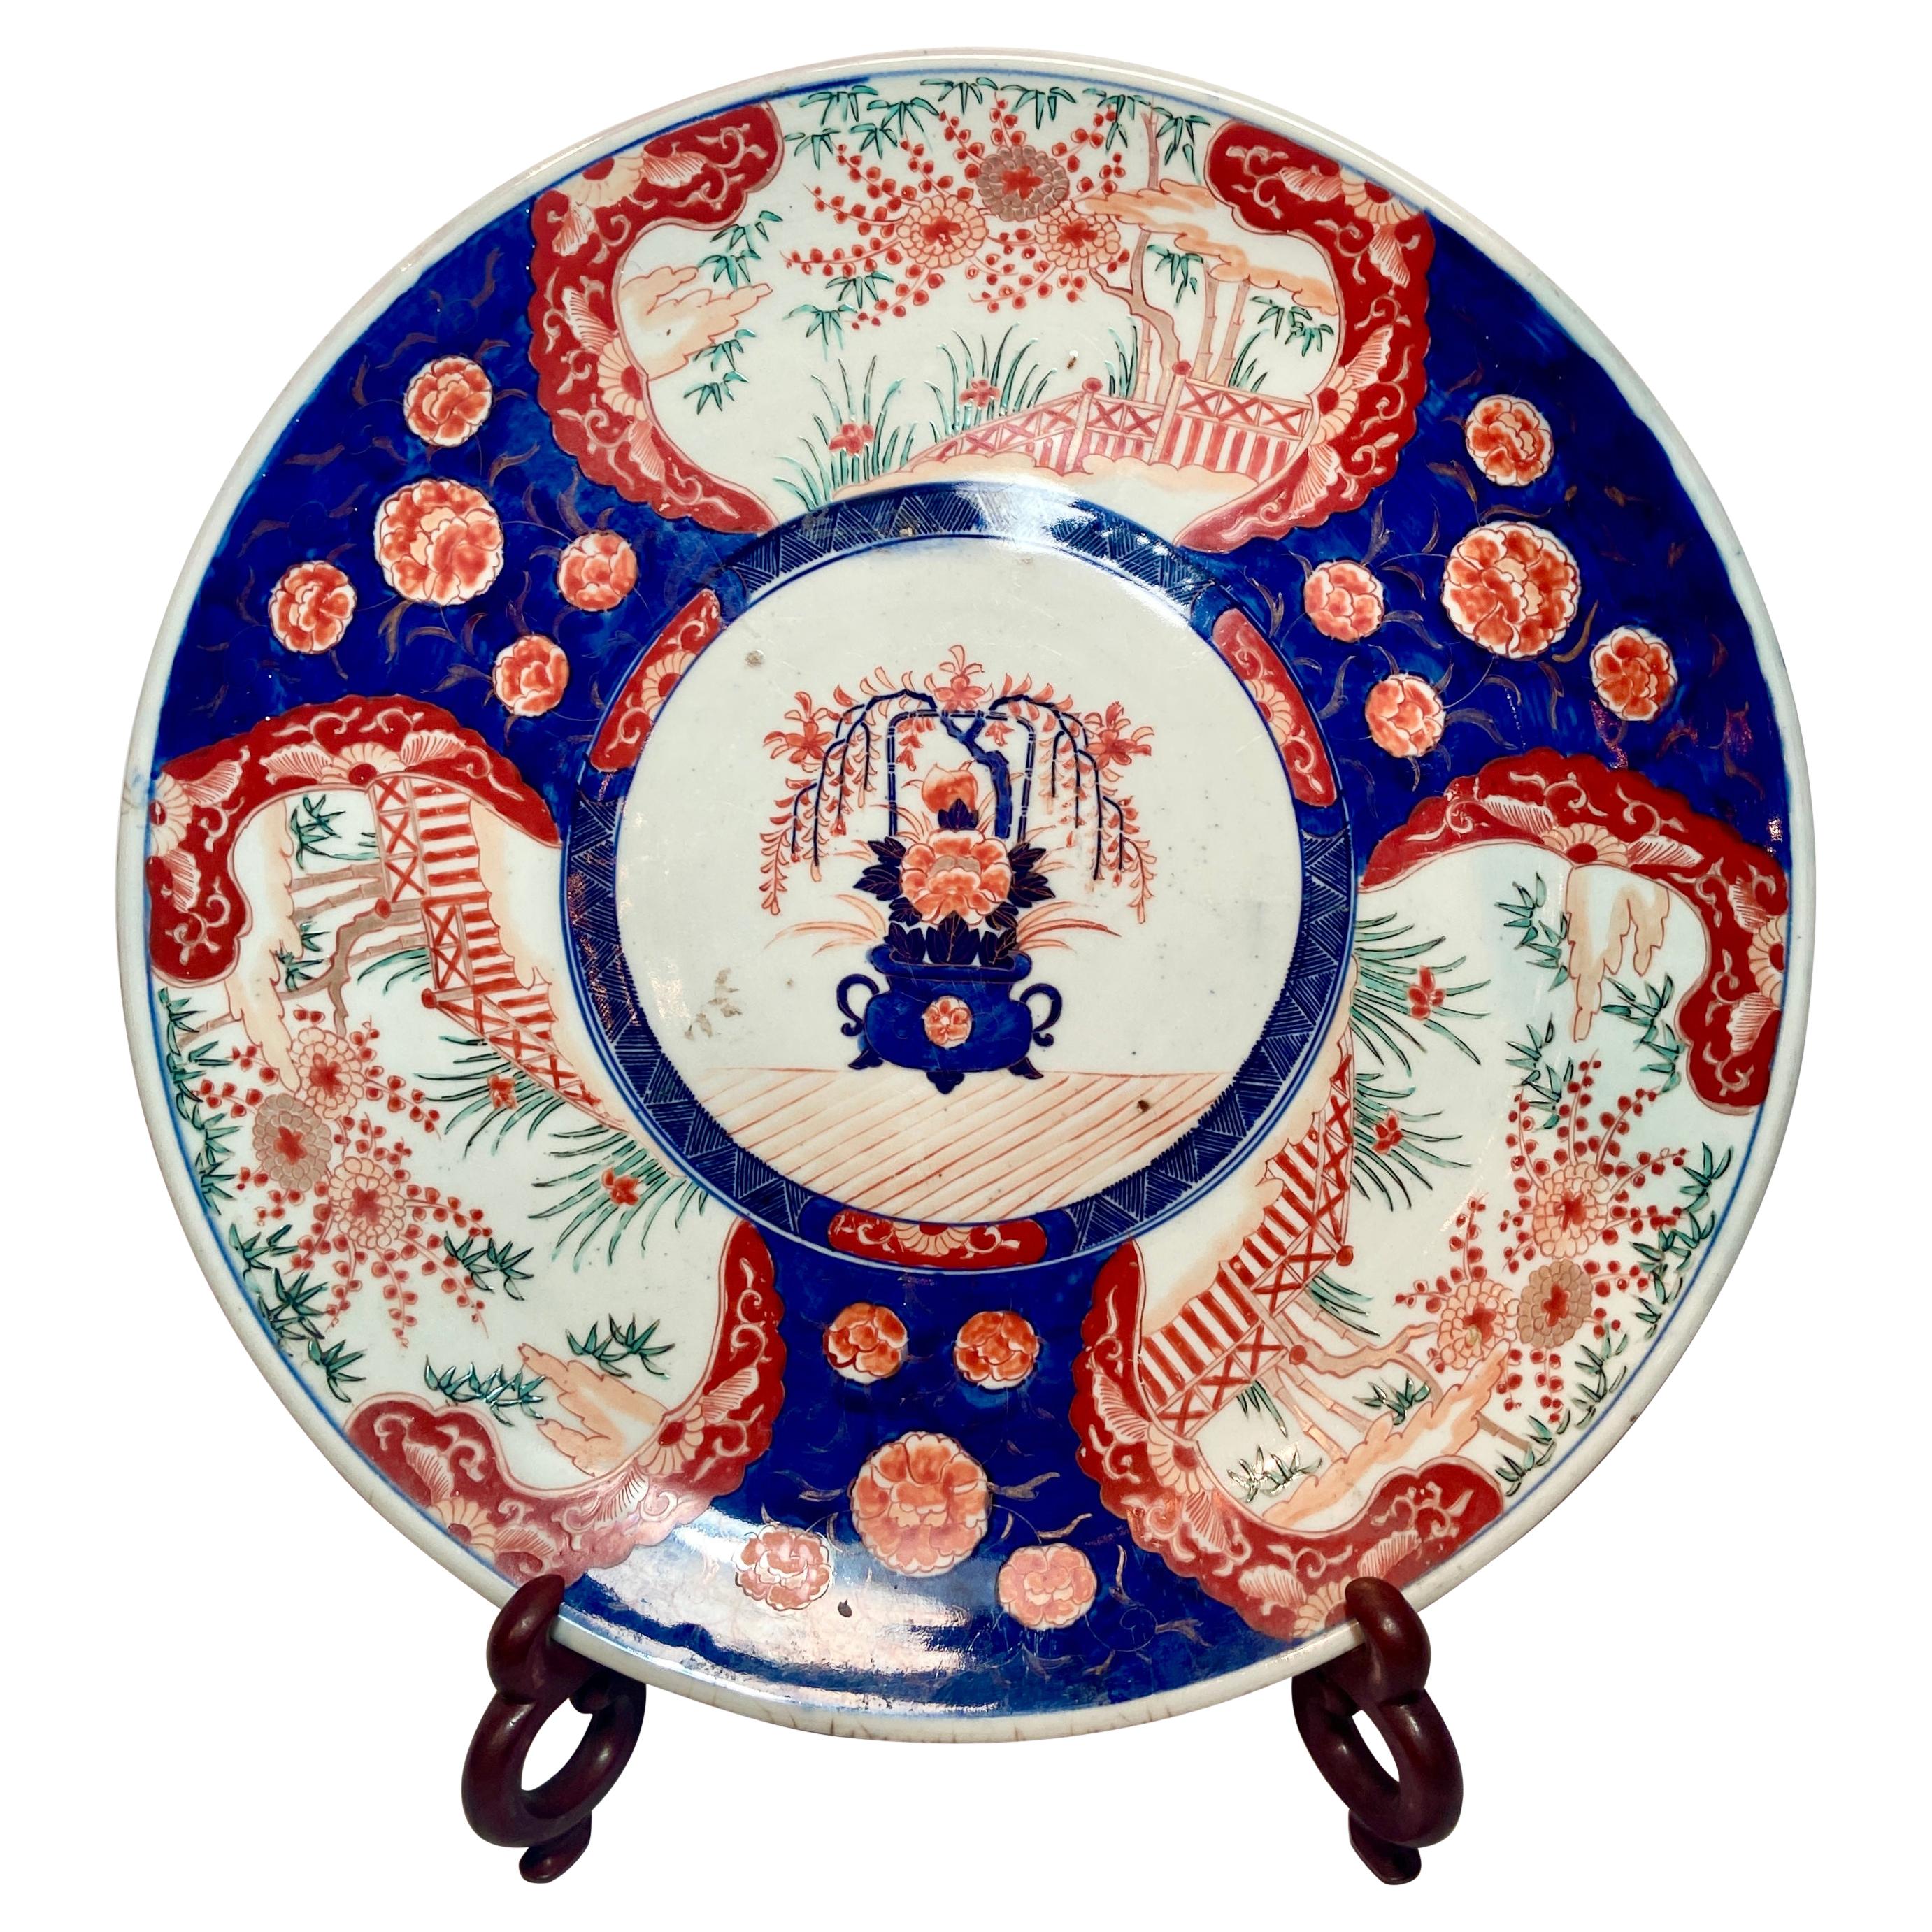 Antique 19th Century Japanese "Imari" Porcelain Plate on Stand